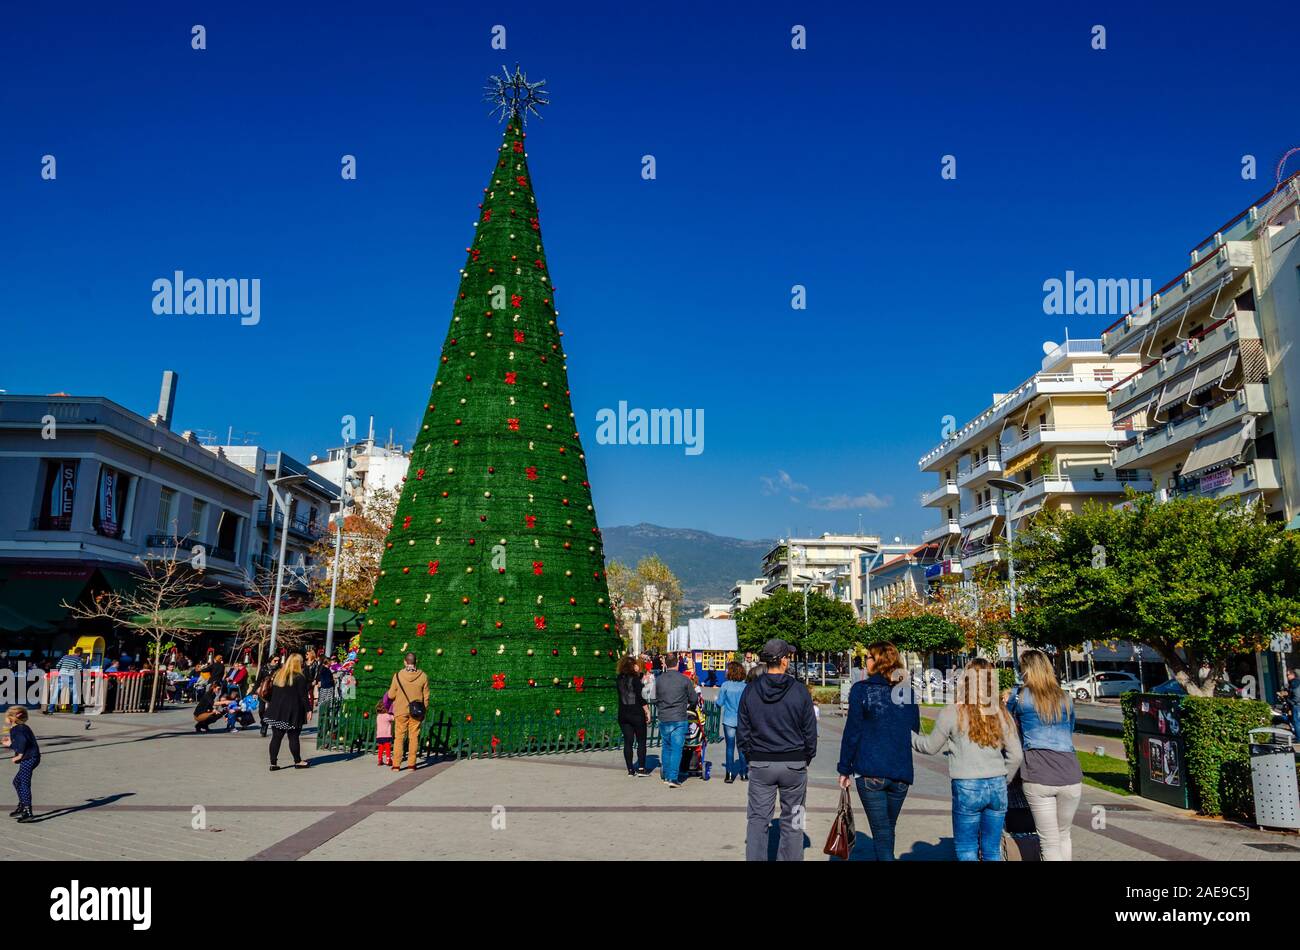 Christmas atmosphere in Kalamata, Greece with colorful decorated ...